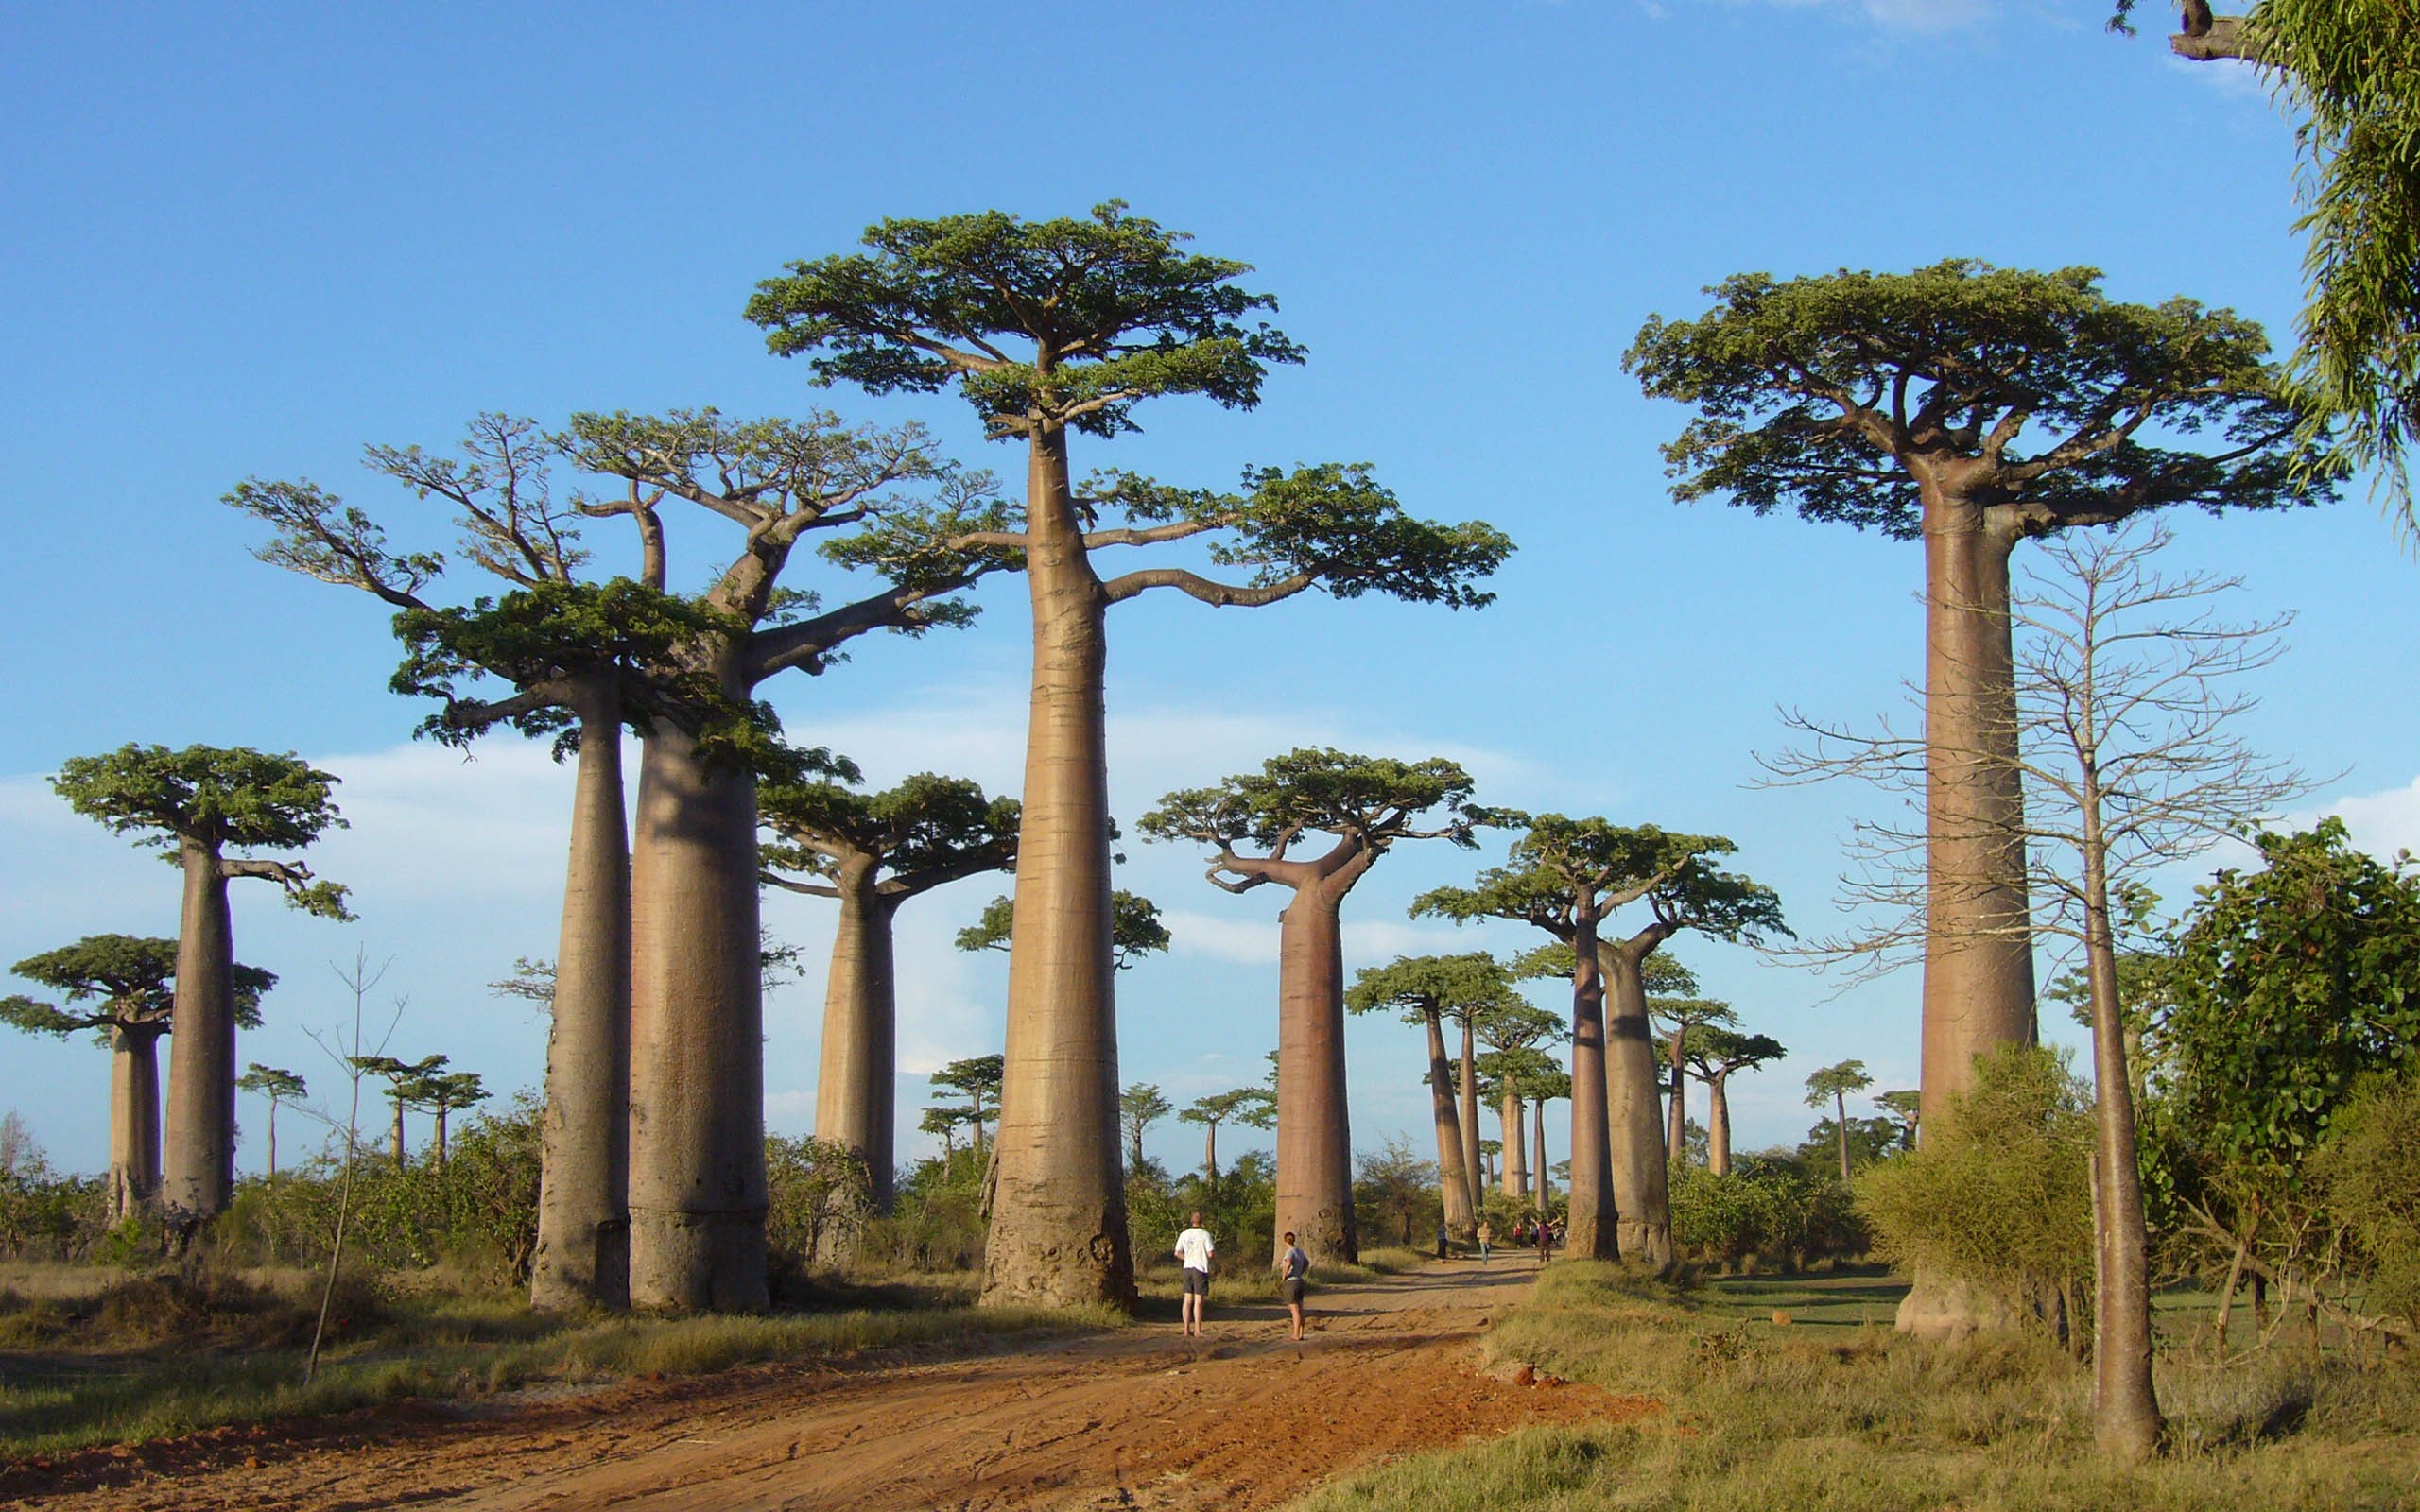 General 2560x1600 Africa trees baobabs nature